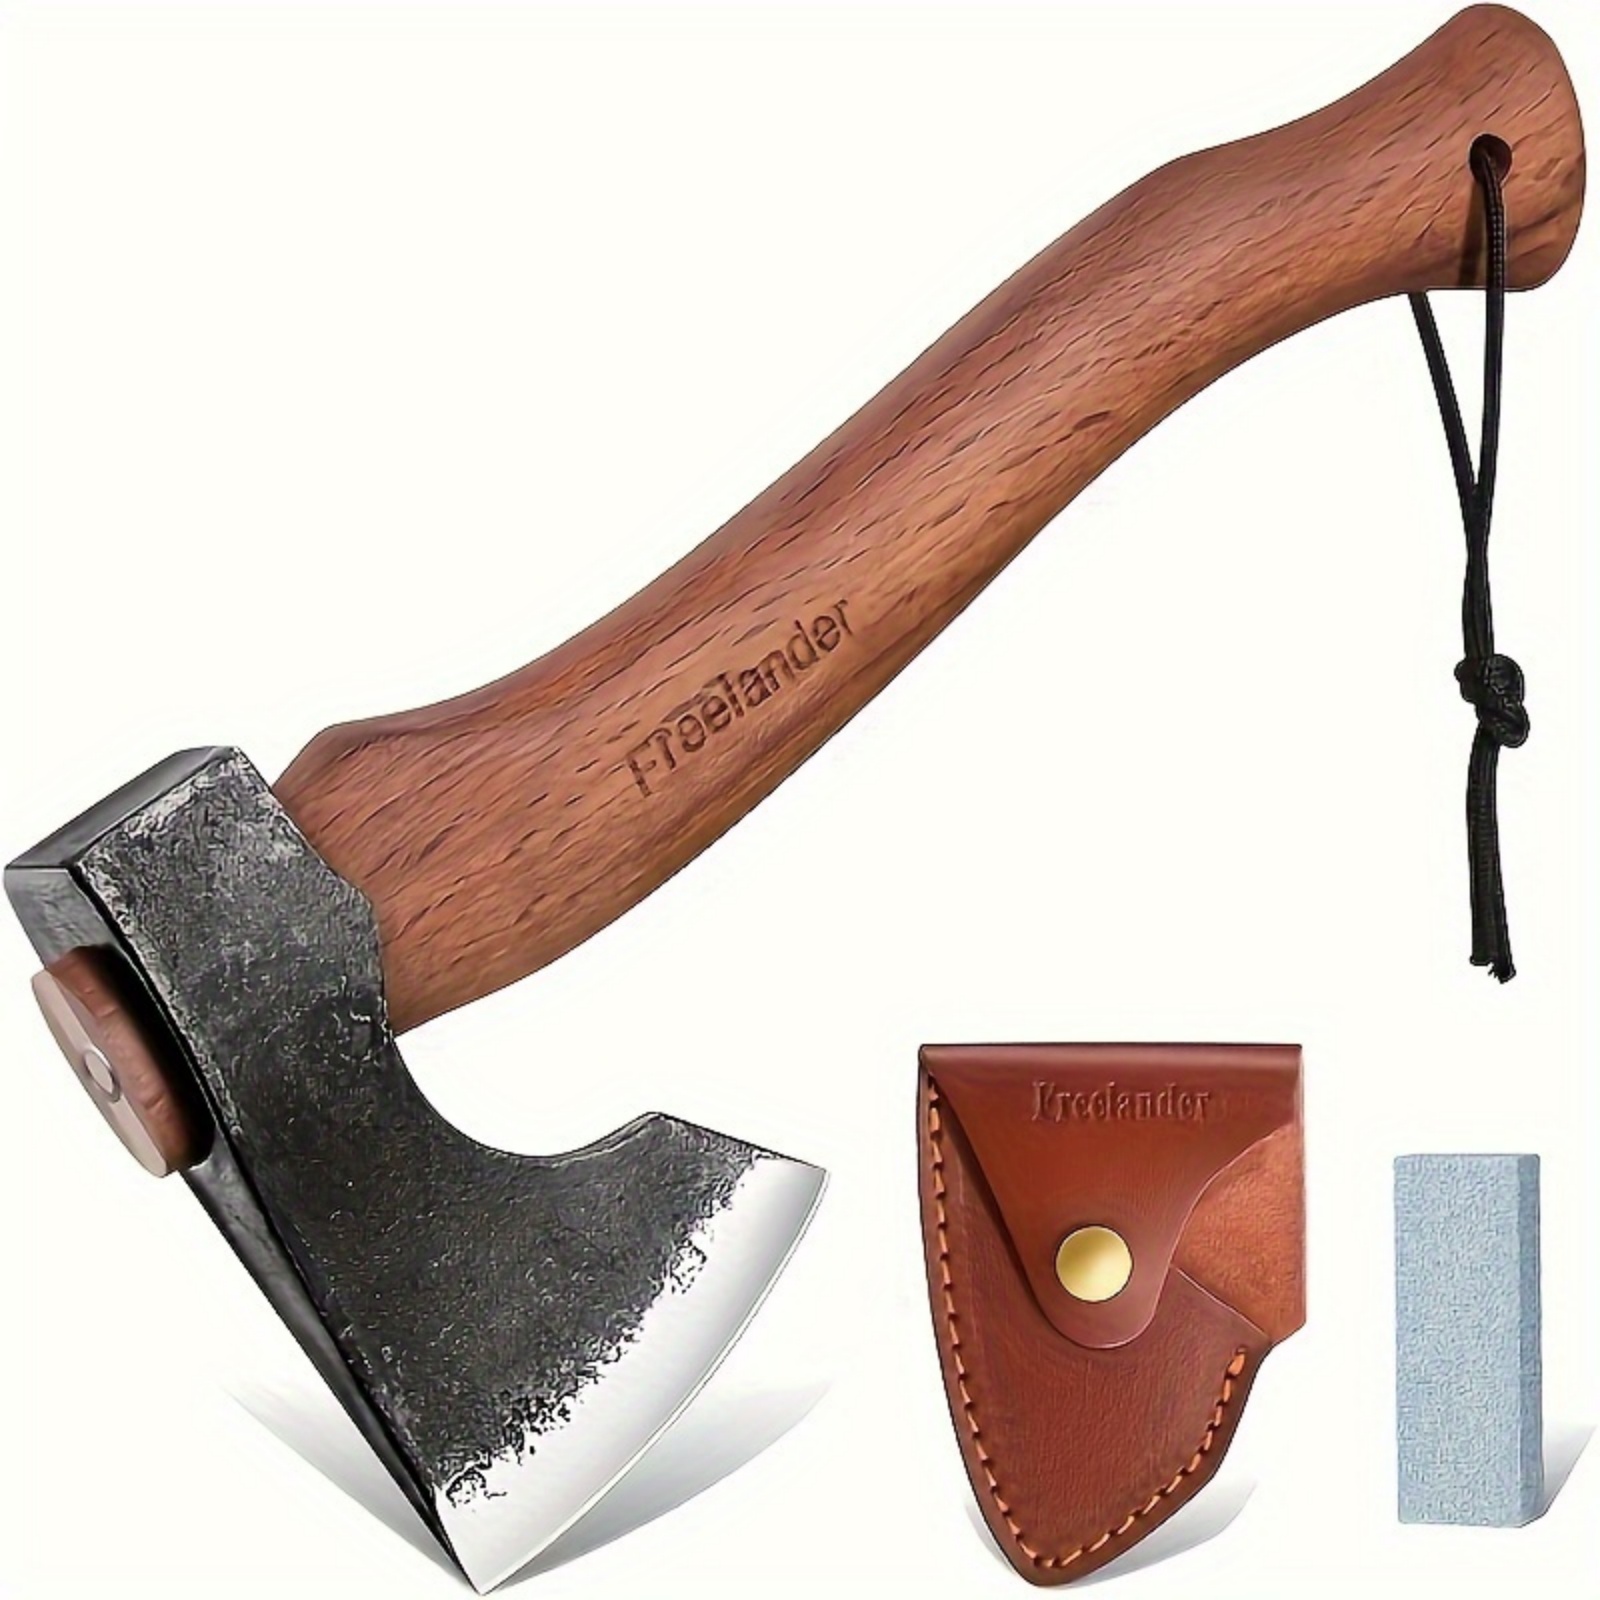 

13.5'' Axes, Hiking And Camping Axes With Walnut Handle, Hand Forged Carbon Steel Bushcraft Axes With Sheath For Outdoor Camping Wood